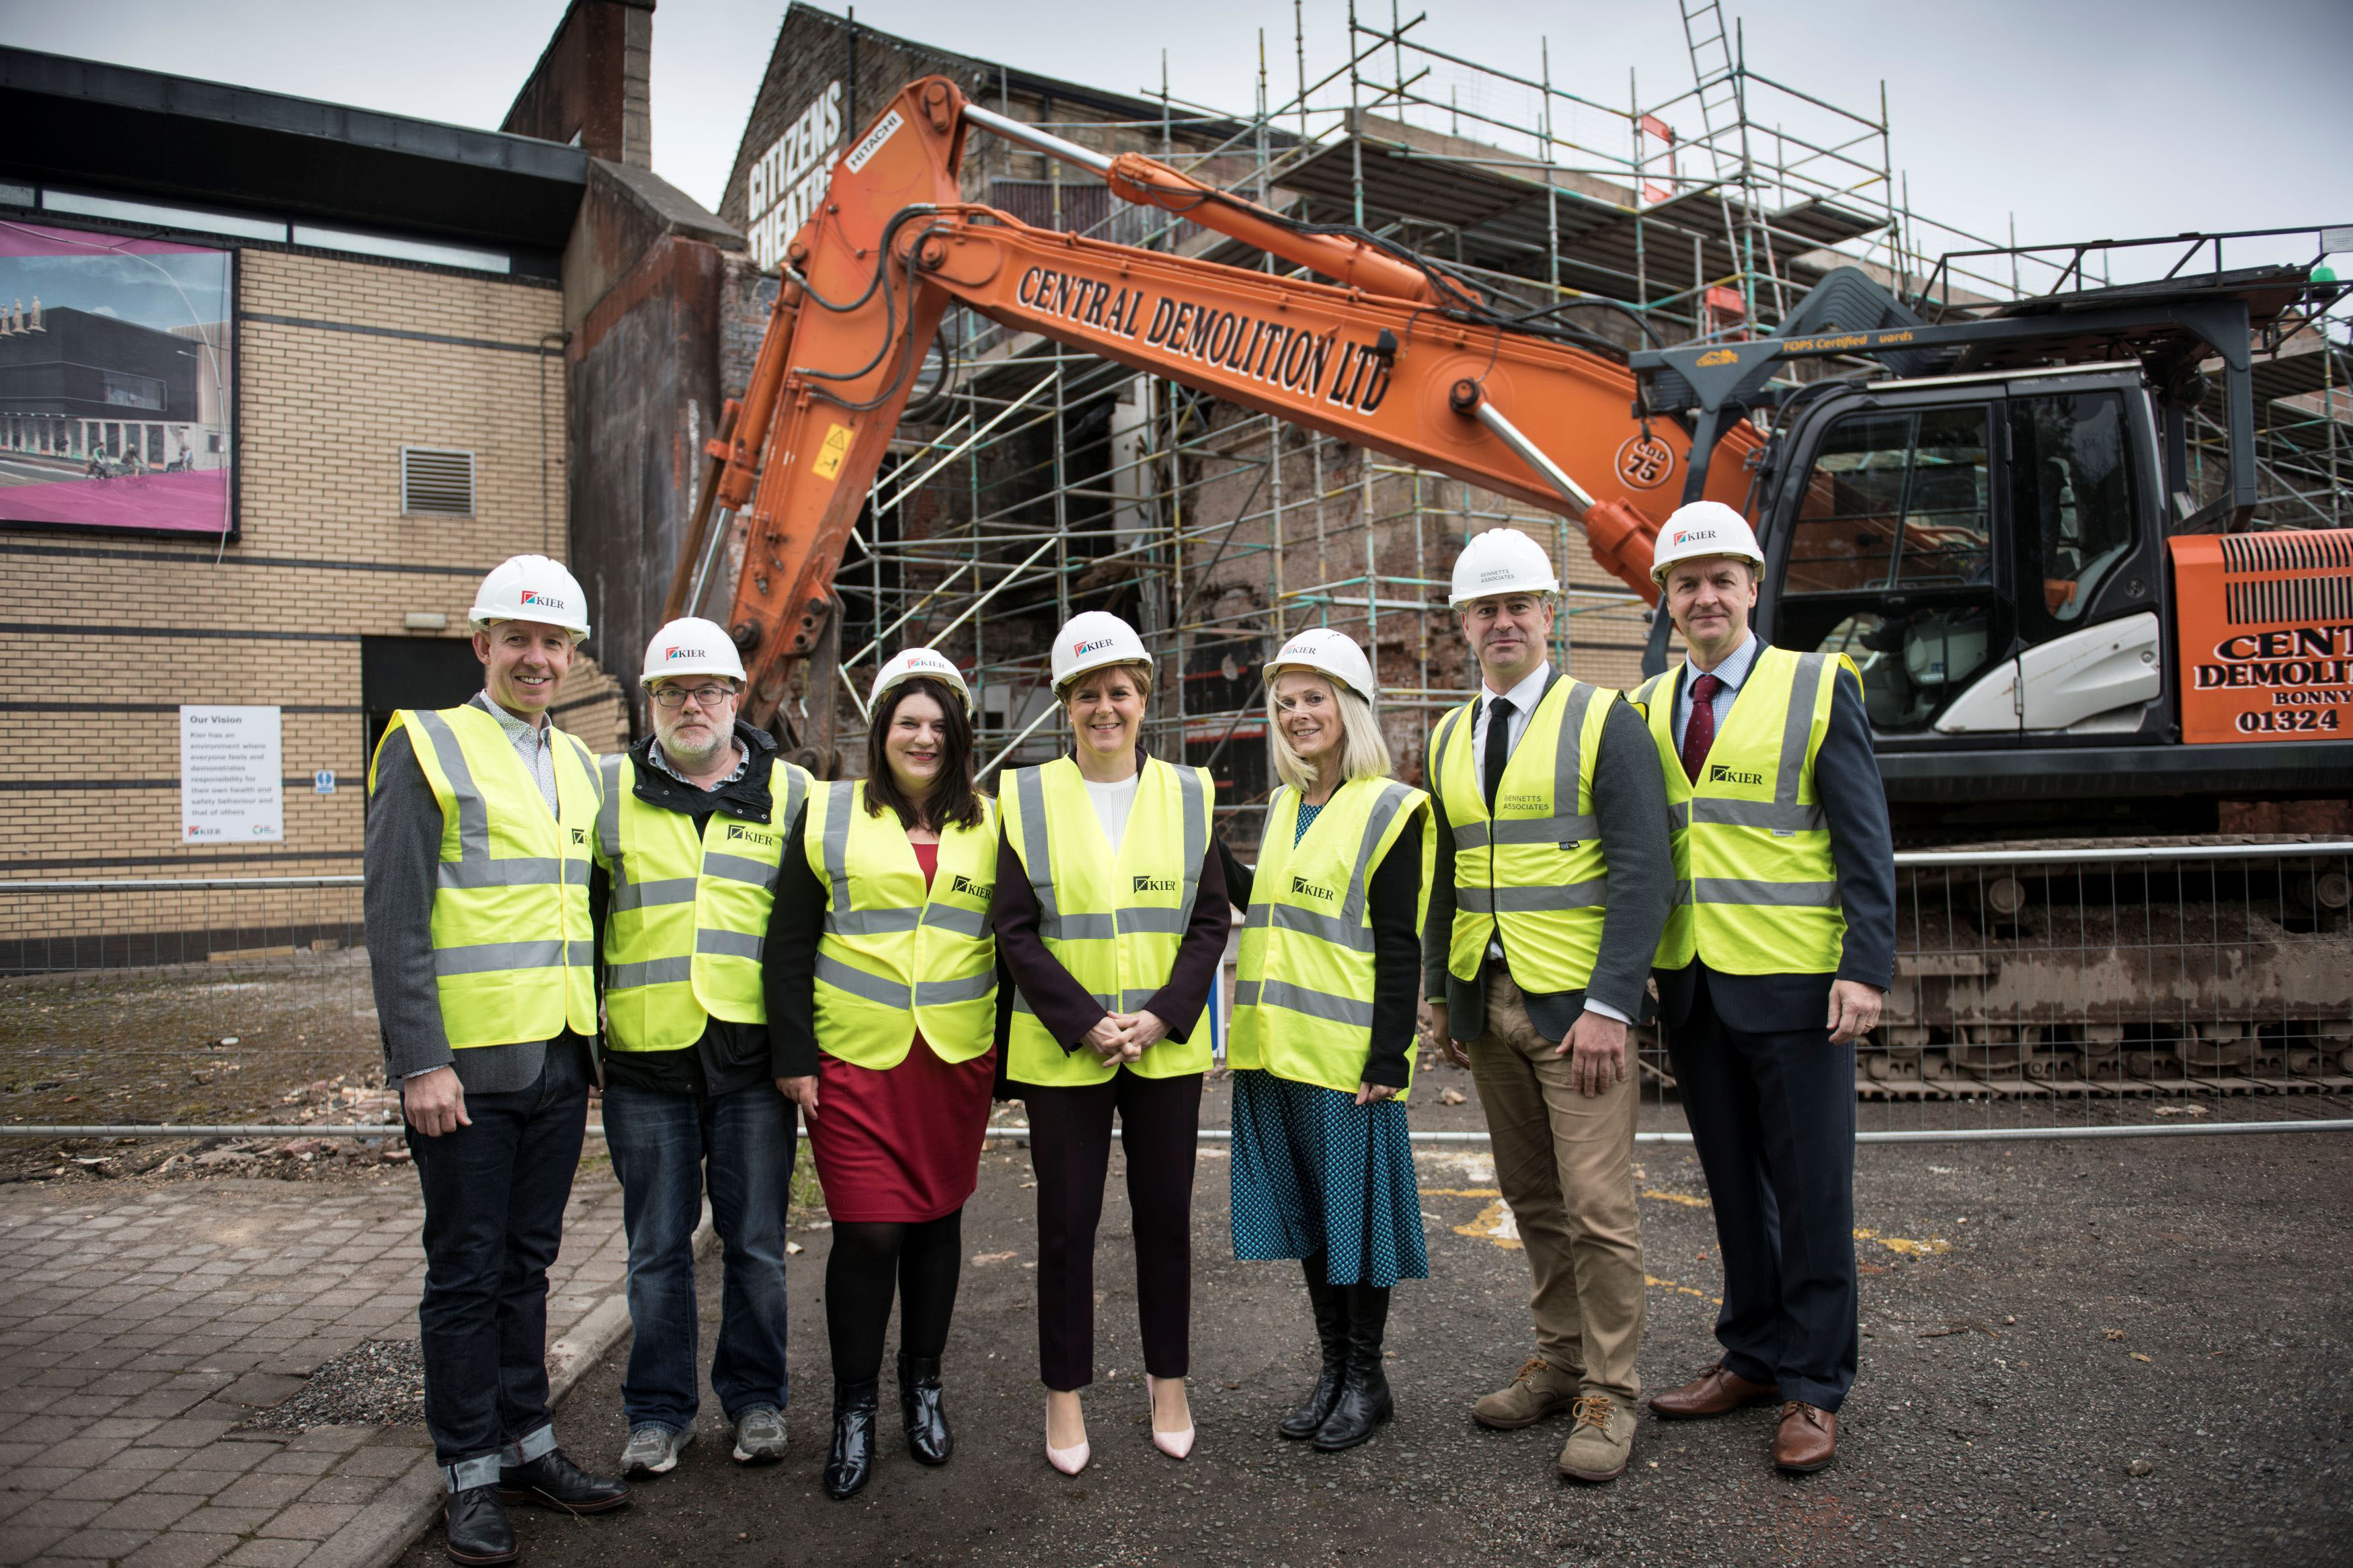 First Minister marks start of Citizens Theatre redevelopment